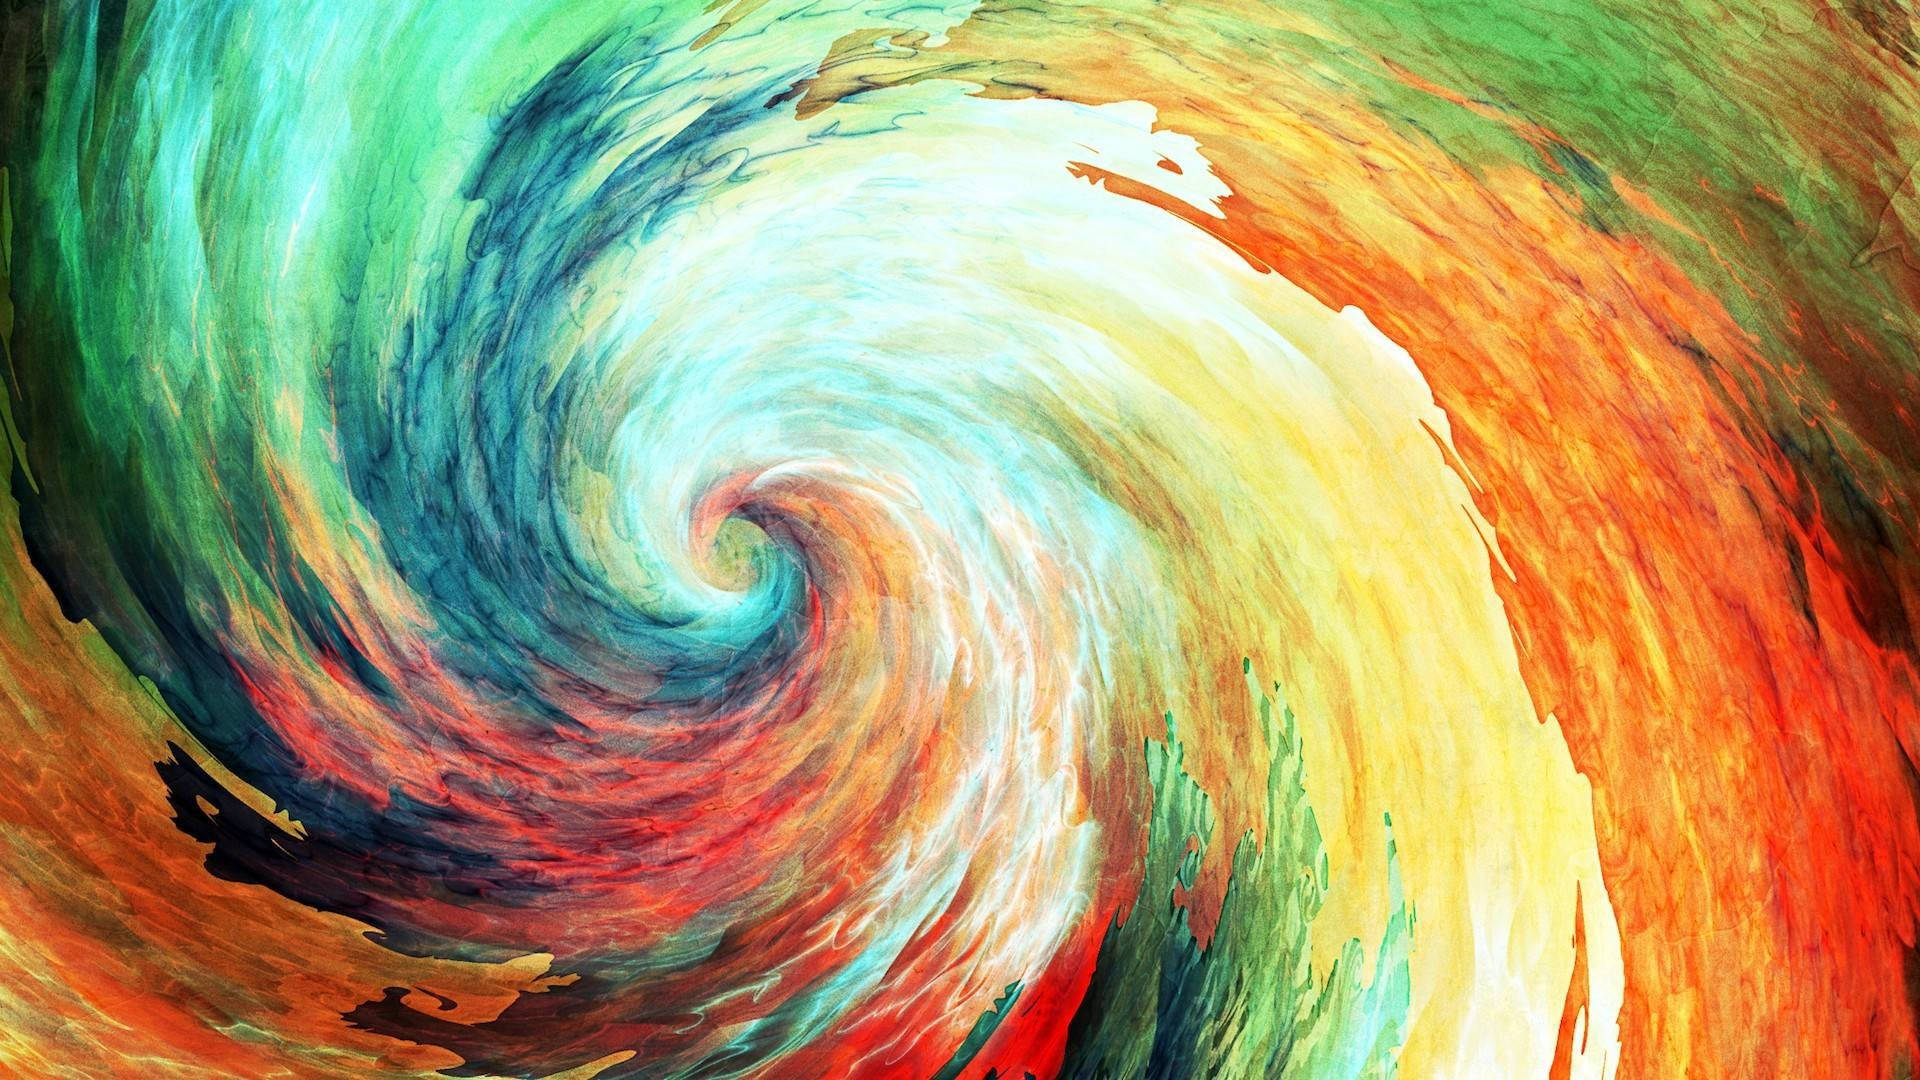 Abstract Swirls Of Color Animated Desktop Wallpaper